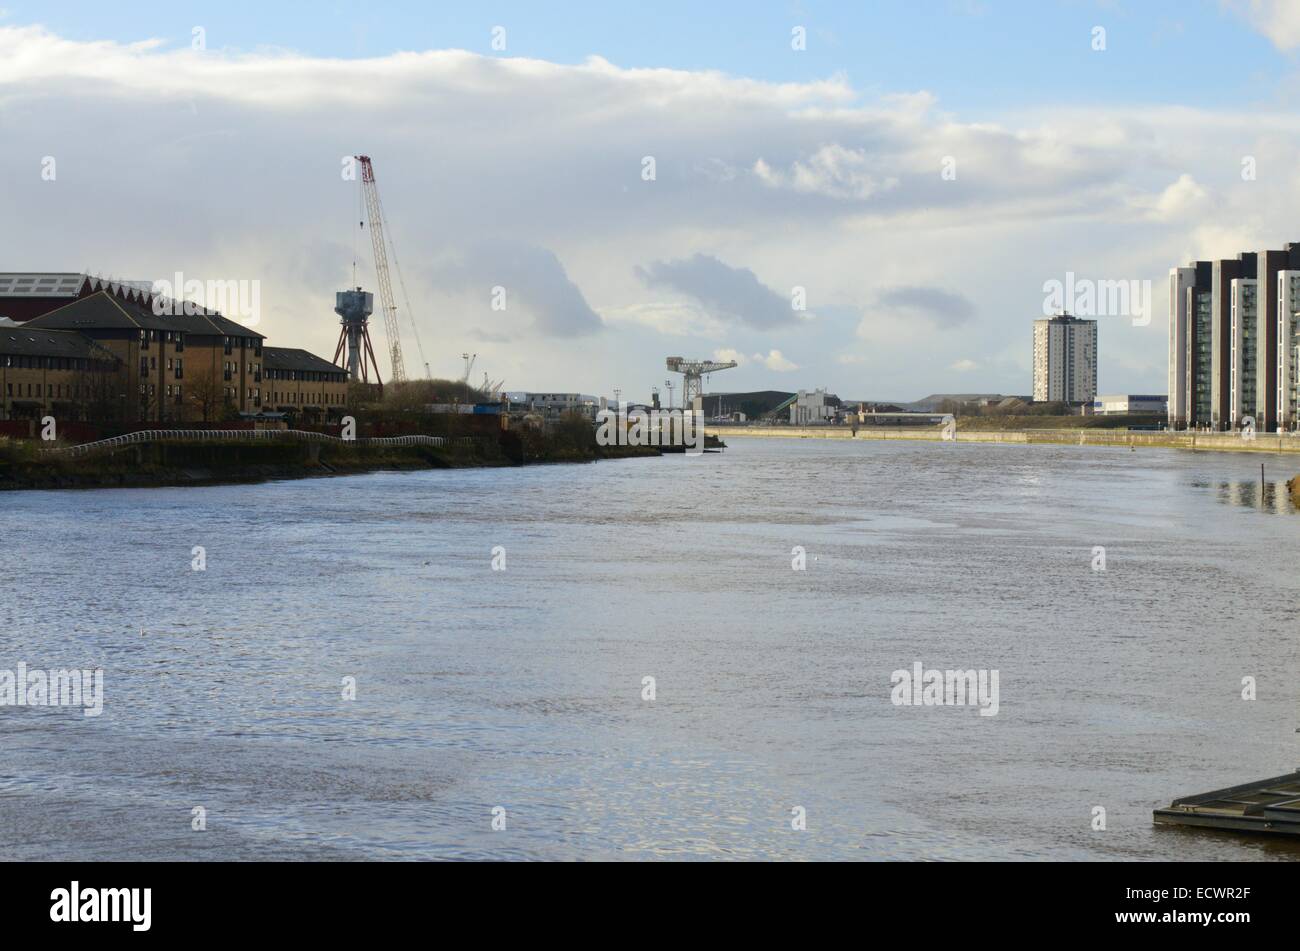 Industrial waterfronts on the River Clyde in Glasgow, Scotland Stock Photo